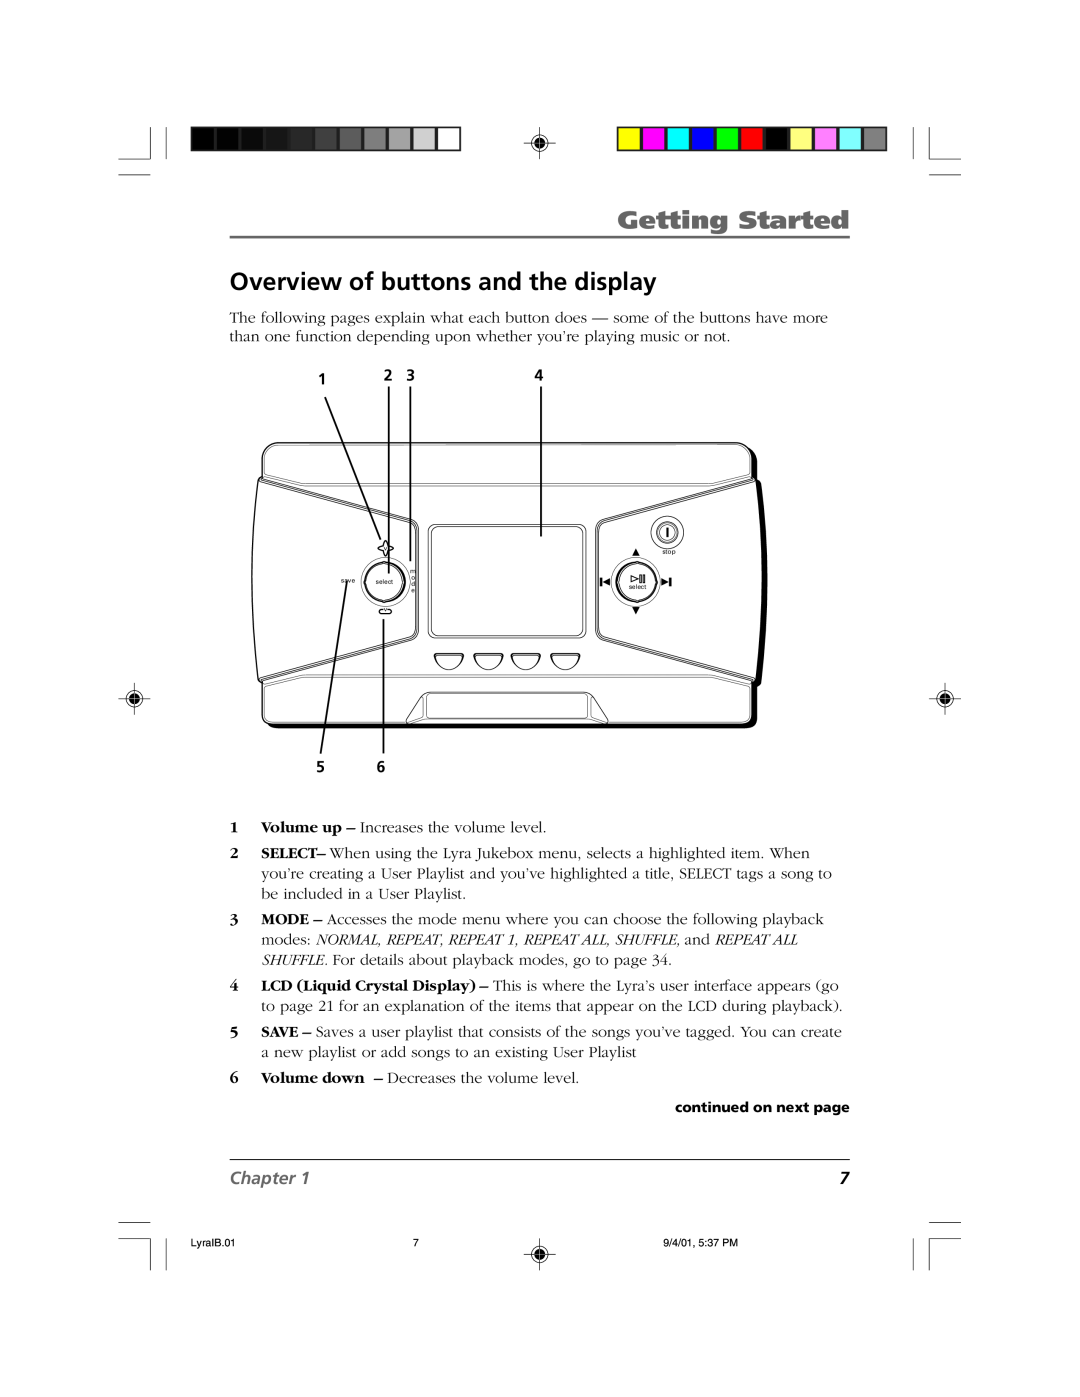 RCA RD2800 manual Overview of buttons and the display, Getting Started, Chapter 